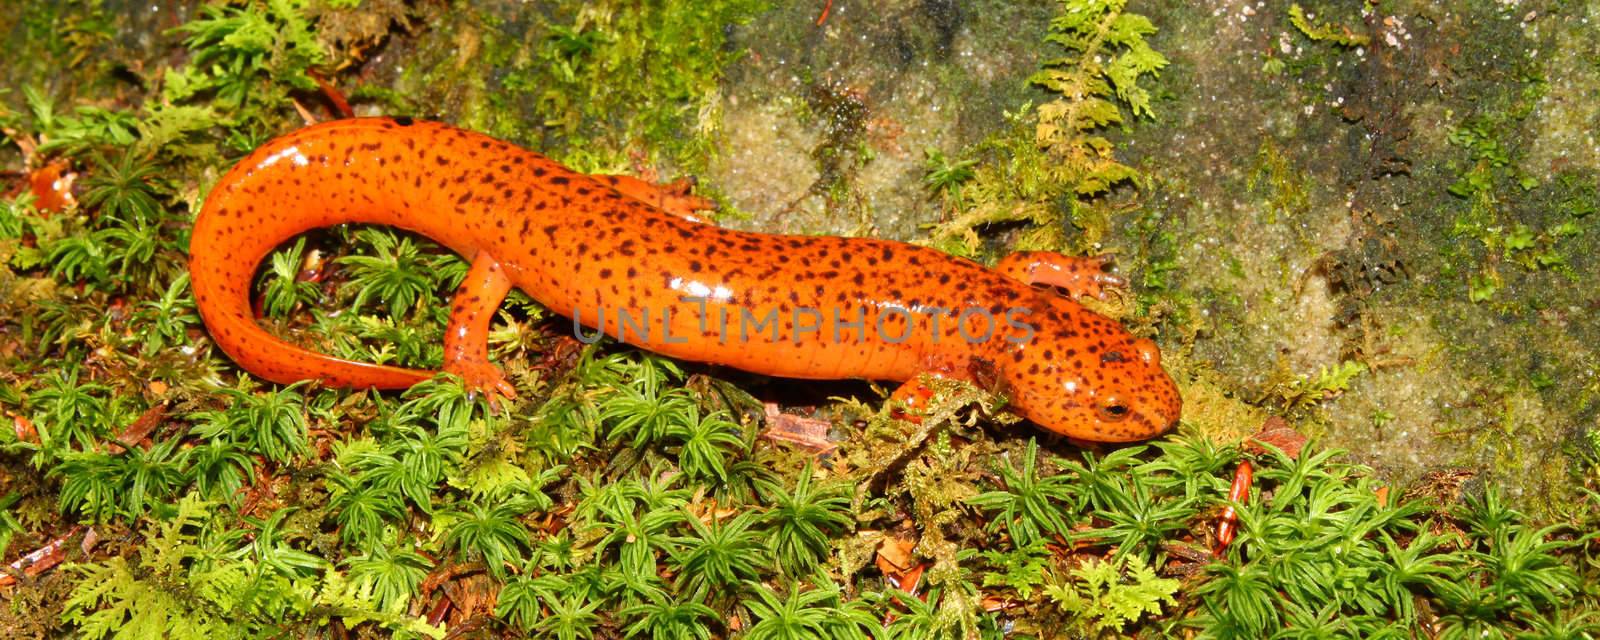 Red Salamander (Pseudotriton ruber) by Wirepec